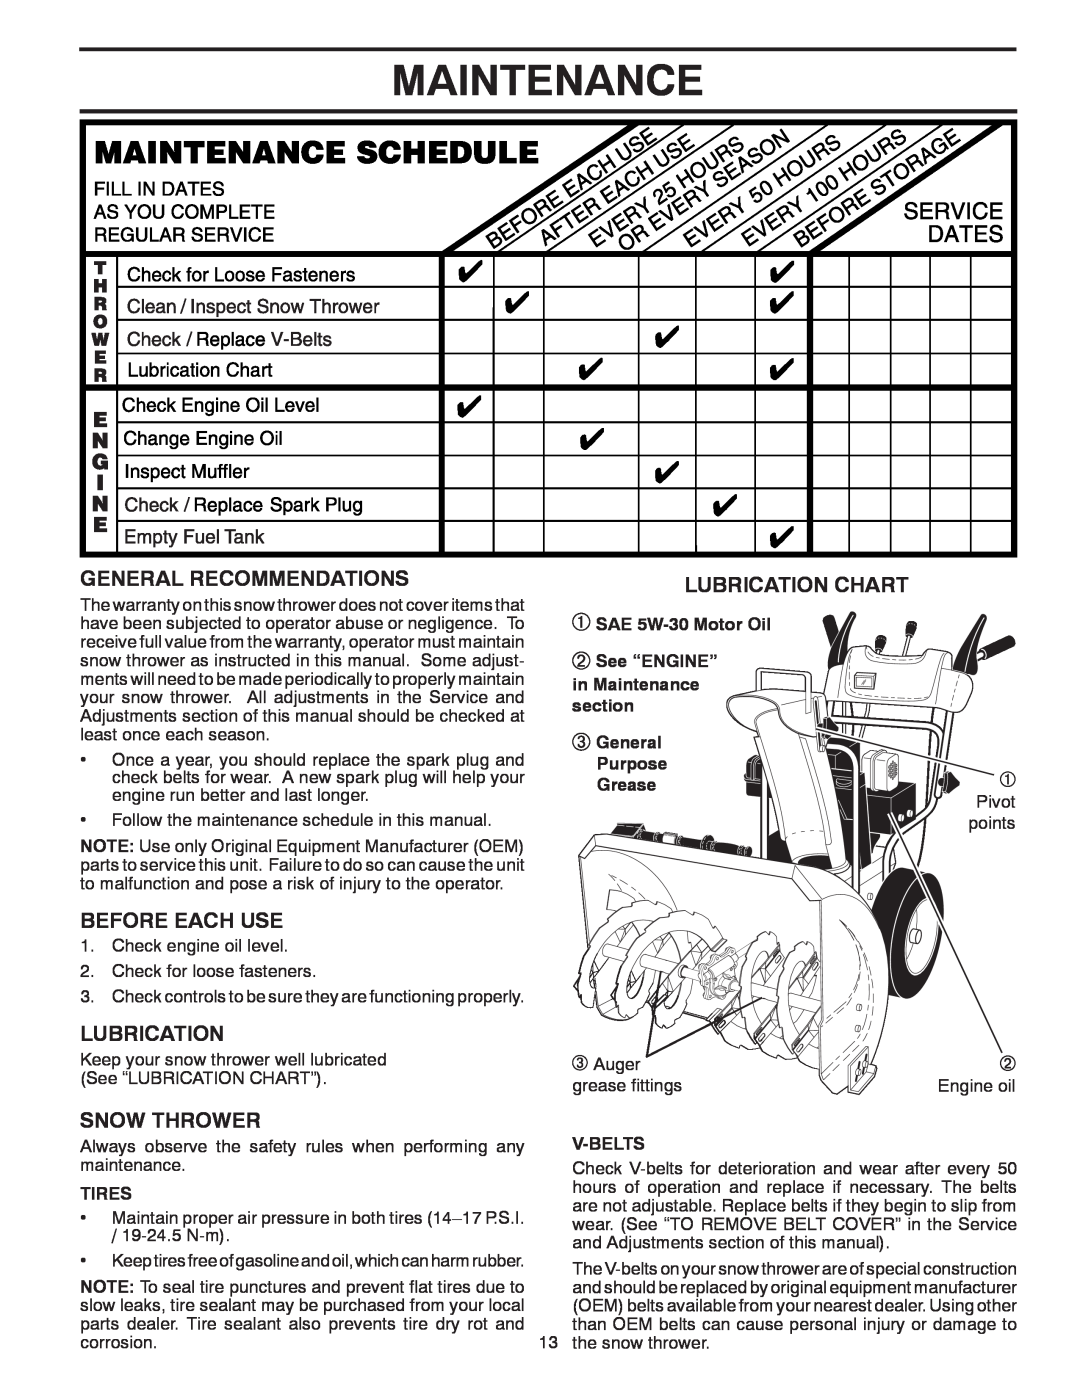 Poulan 96194000503 Maintenance, General Recommendations, Before Each Use, Lubrication Chart, Snow Thrower, Tires 